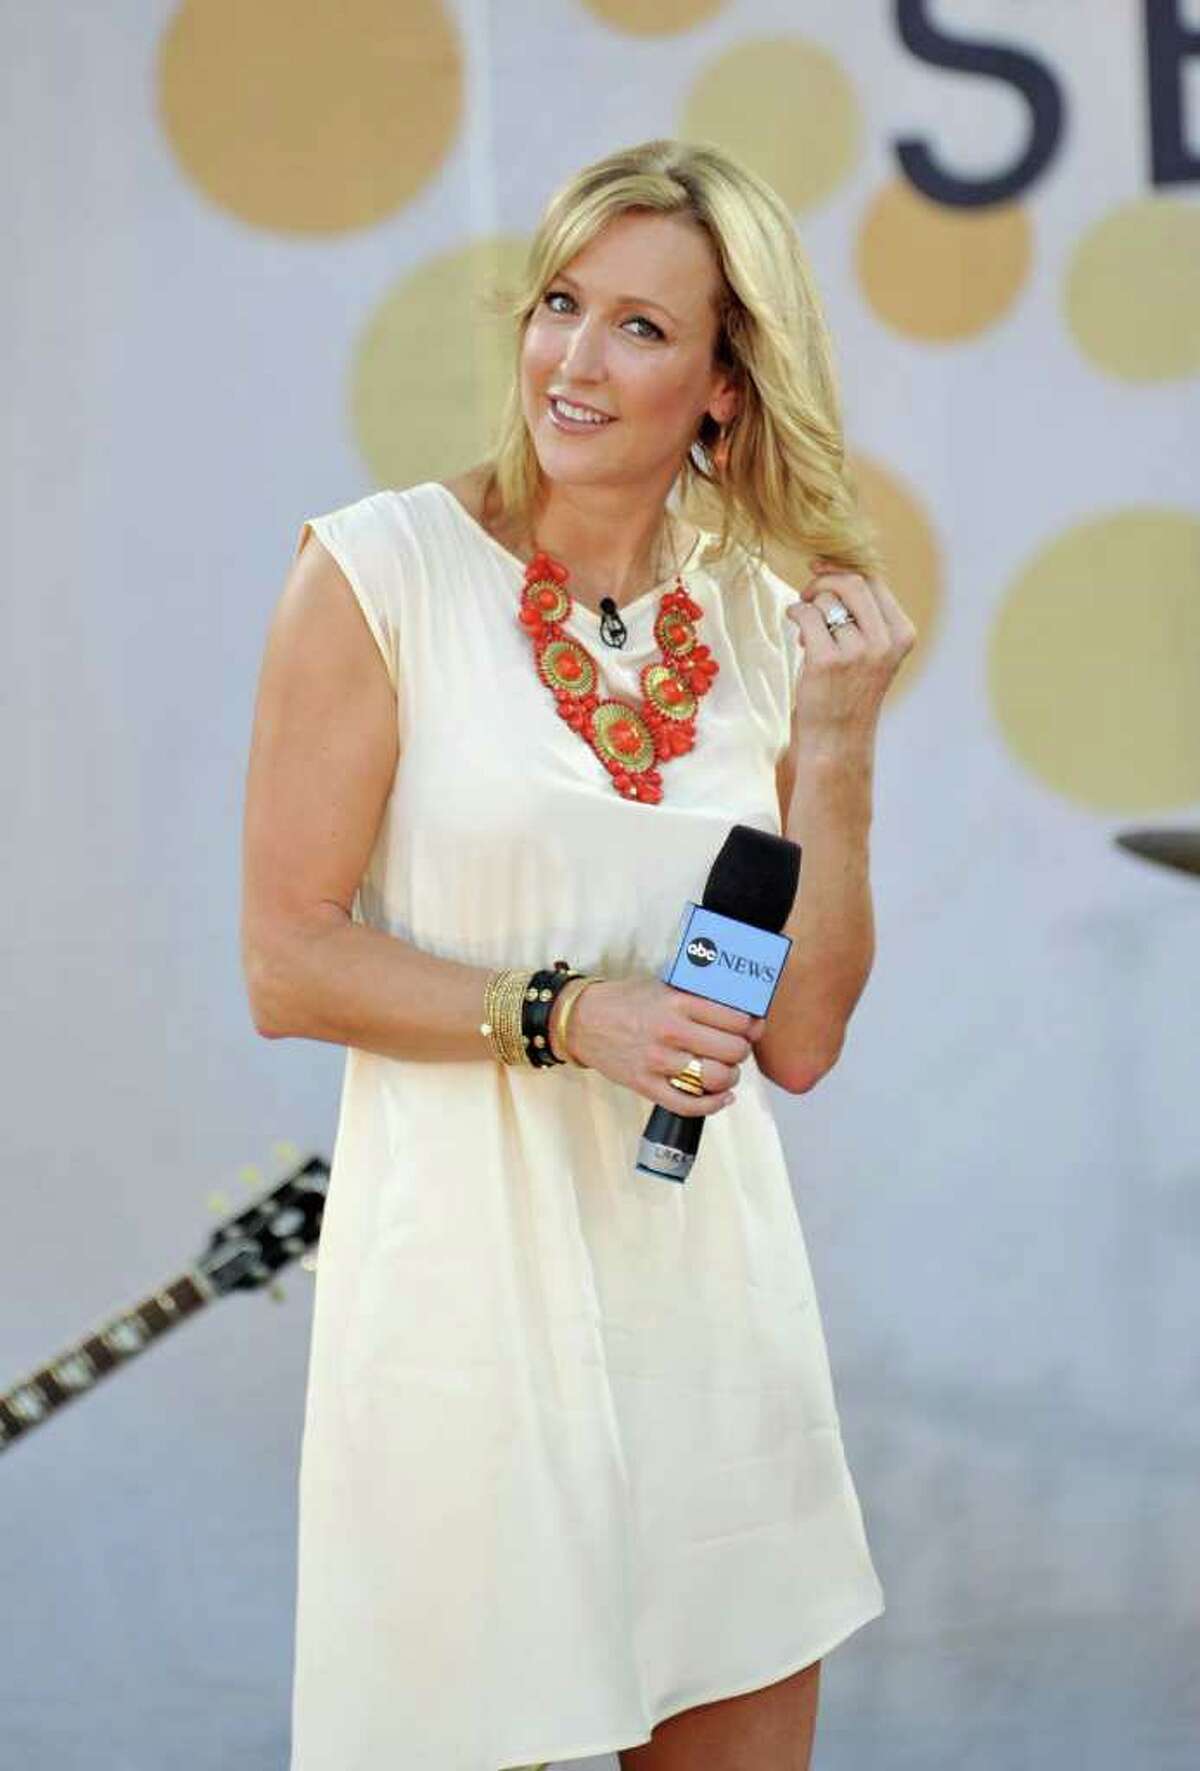 Television personality Lara Spencer was seen shopping at Magaschoni on Mason Street in Greenwich last week.